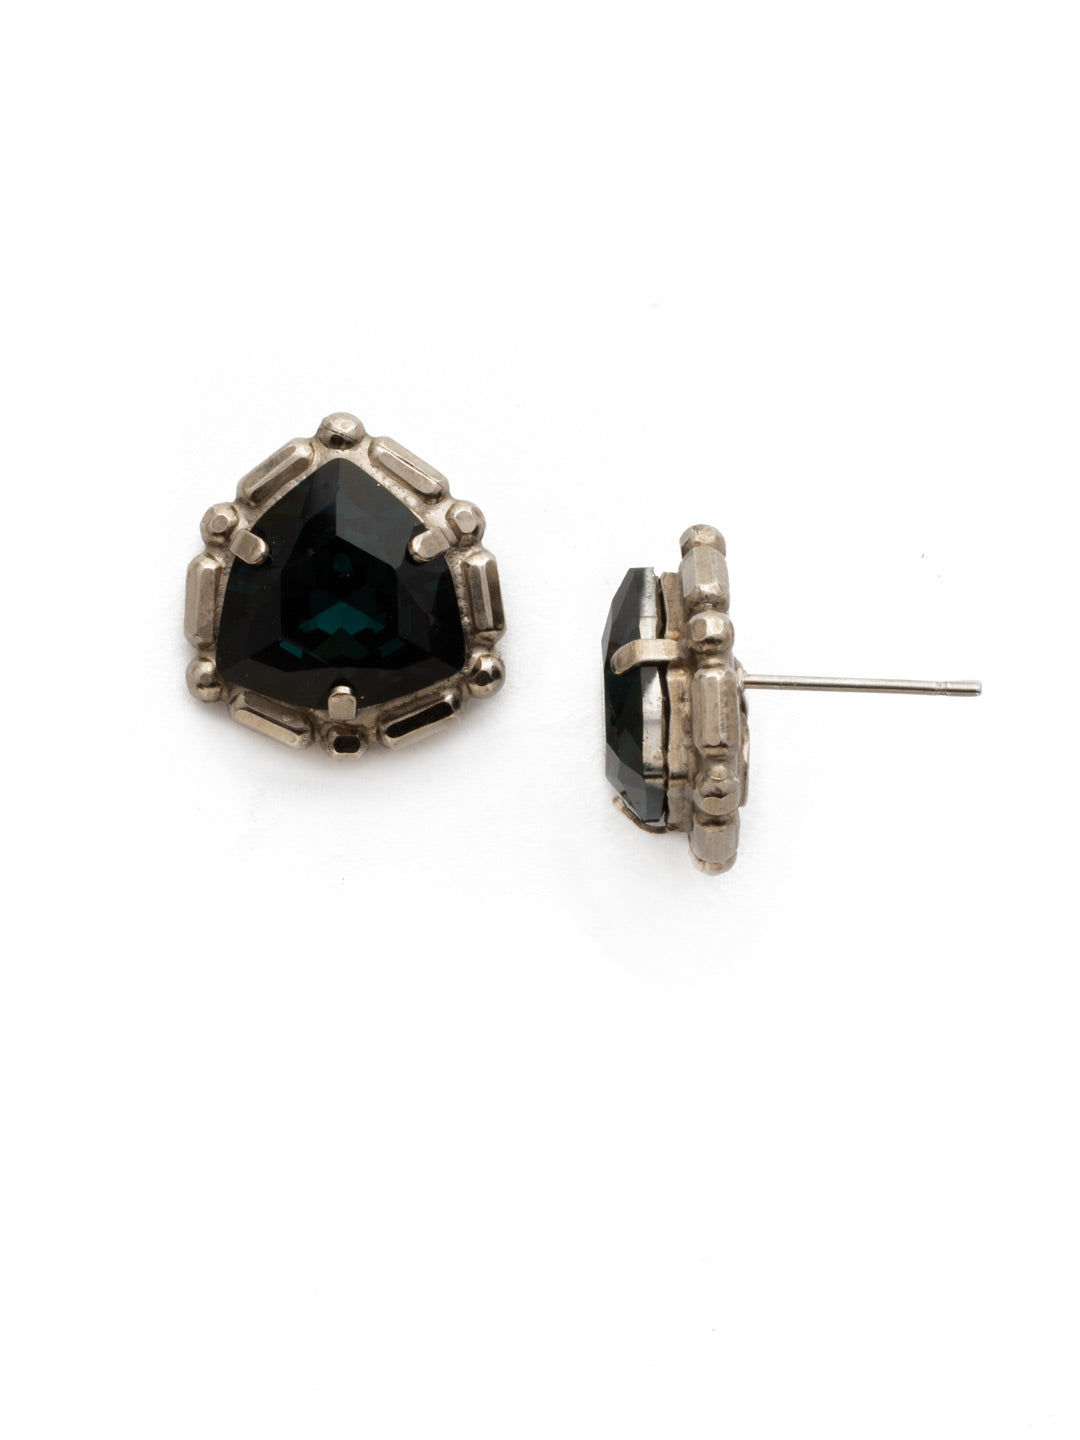 Primula Earring - EDX8ASBSD - A shield shaped crystal in a detailed metal setting. Perfect if you want to add just a bit of sparkle to any outfit!